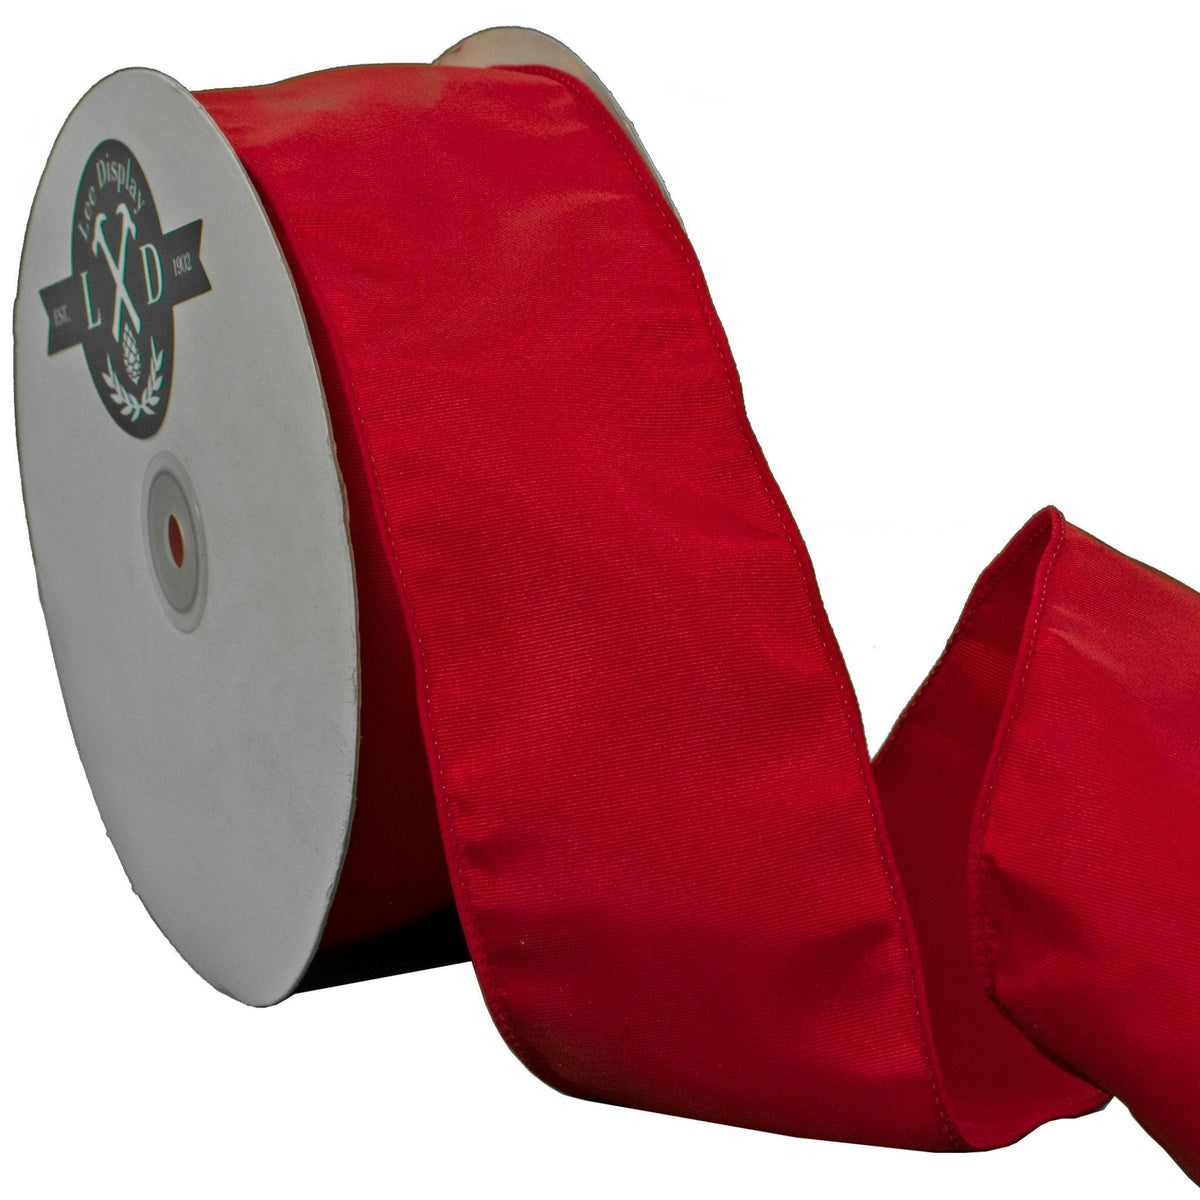 Lee Dispay's 3in Wide Red Christmas Ribbon with a Wired Edge on sale in 50 Yard Rolls.  Buy now at leedisplay.com